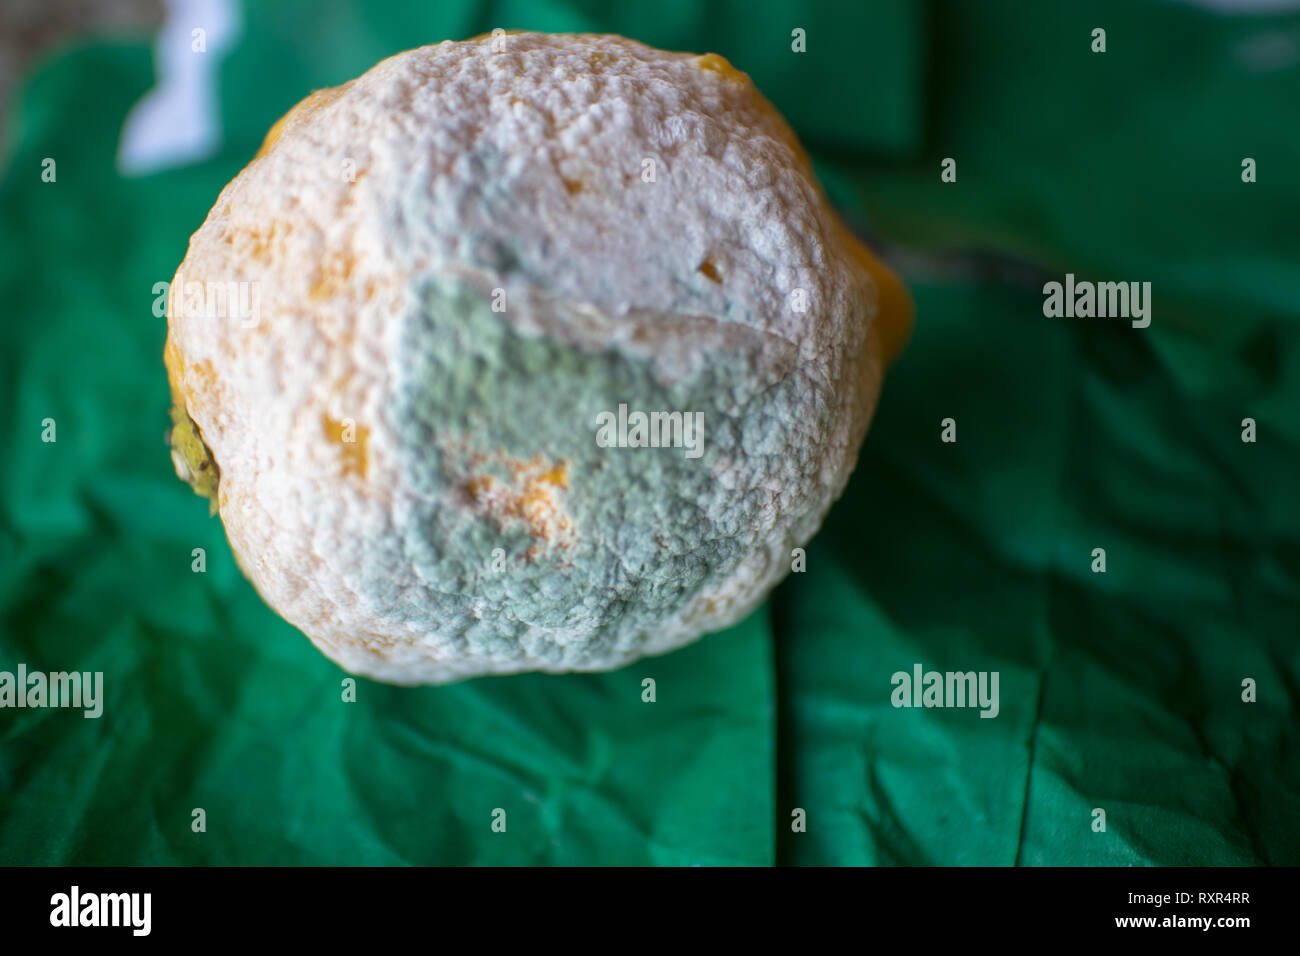 isolated, rotten, decayed, rotten lemon on a green drape Stock Photo